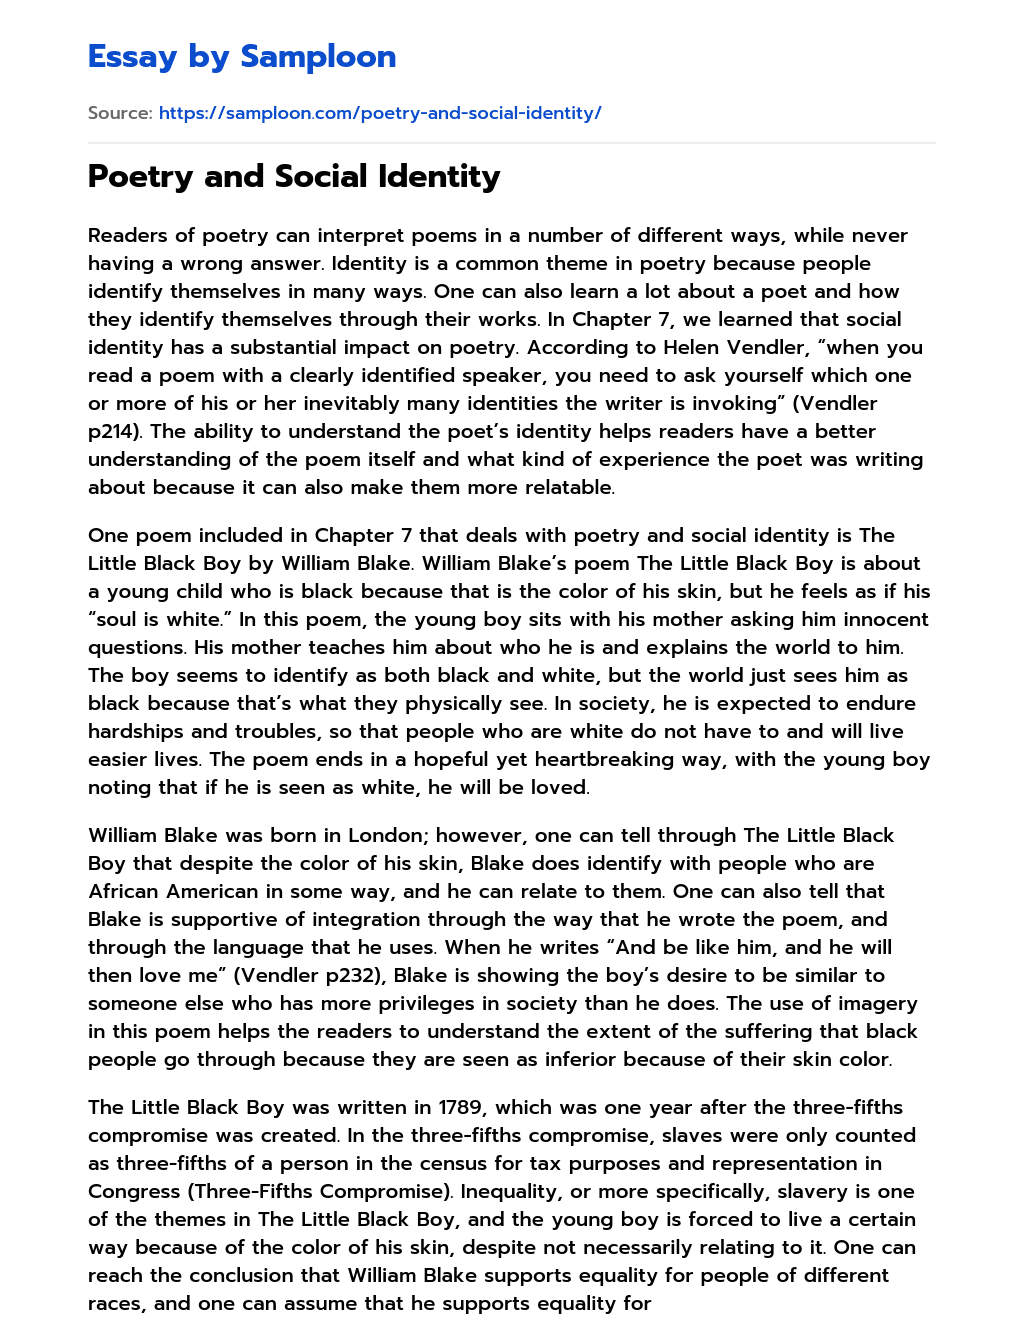 Poetry and Social Identity essay